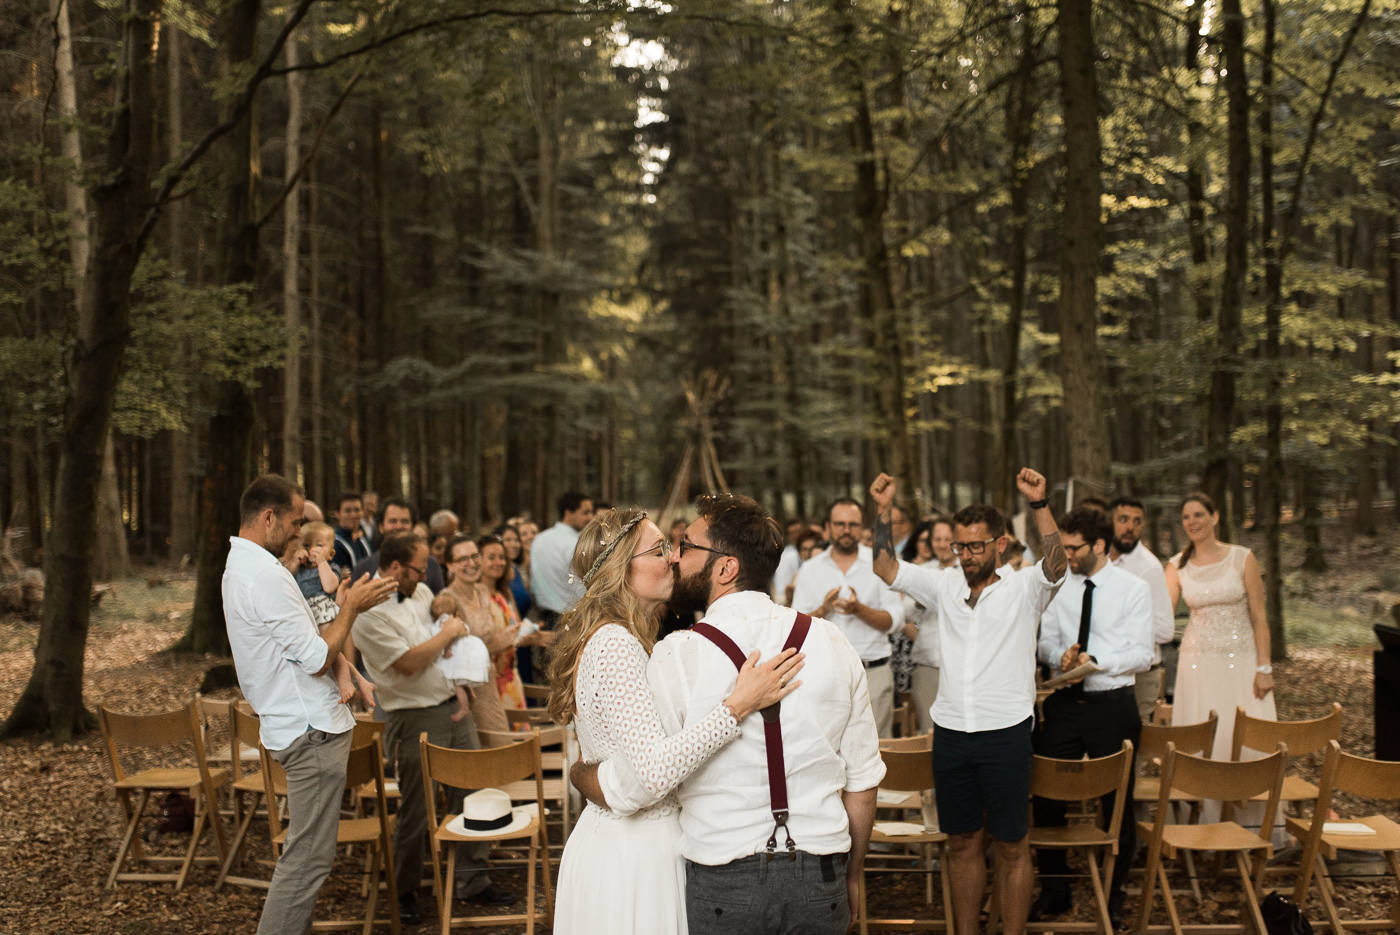 Wedding couple is kissing in front of the wedding guests after their green wedding ceremony in the forest